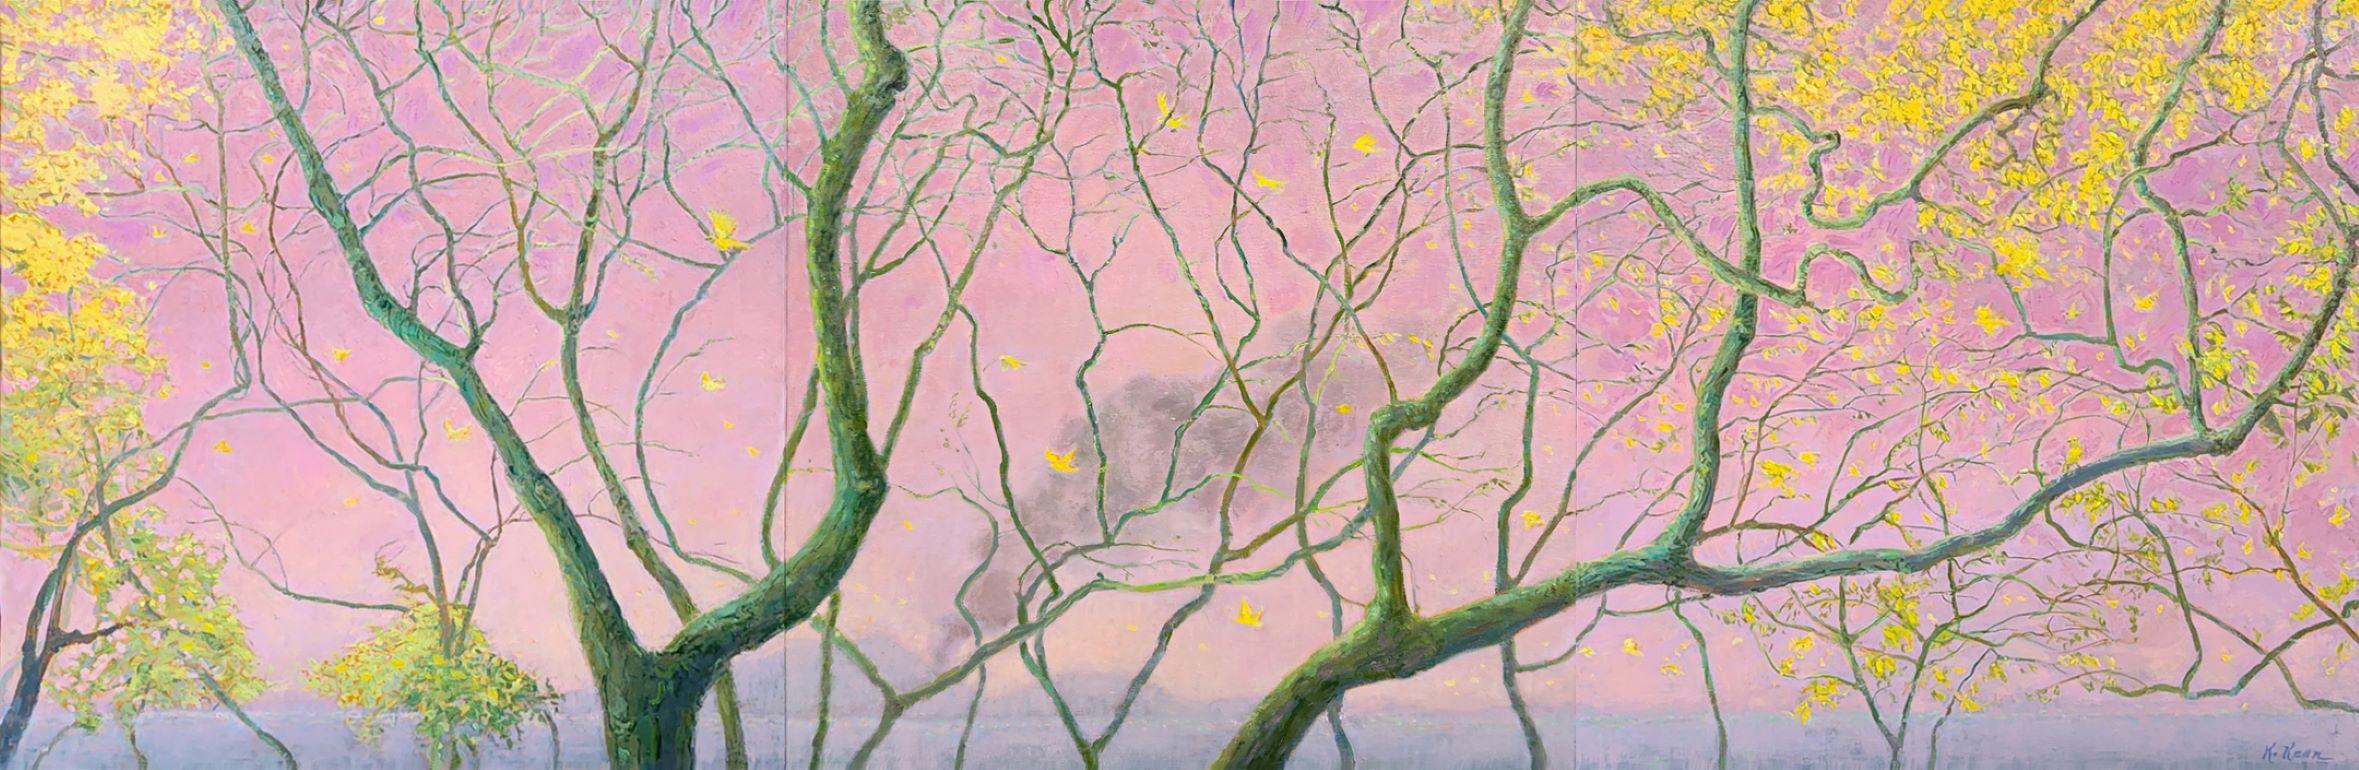 Where Yellow Birds Fly Across Pink Skies triptych contemporary landscape - Painting by Katherine Kean